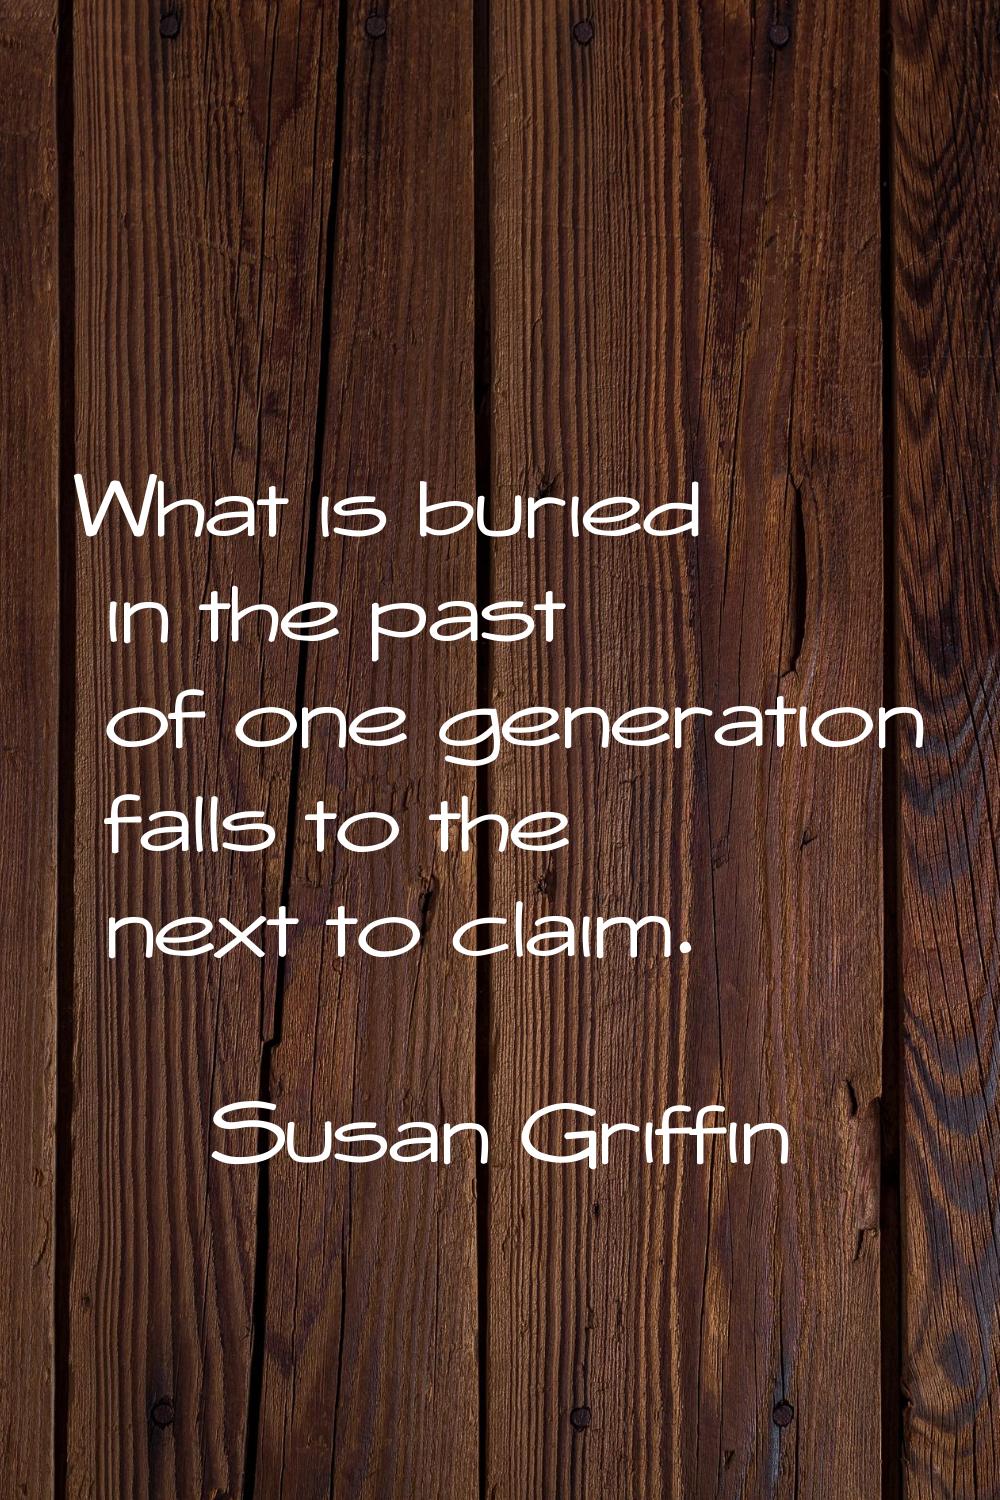 What is buried in the past of one generation falls to the next to claim.